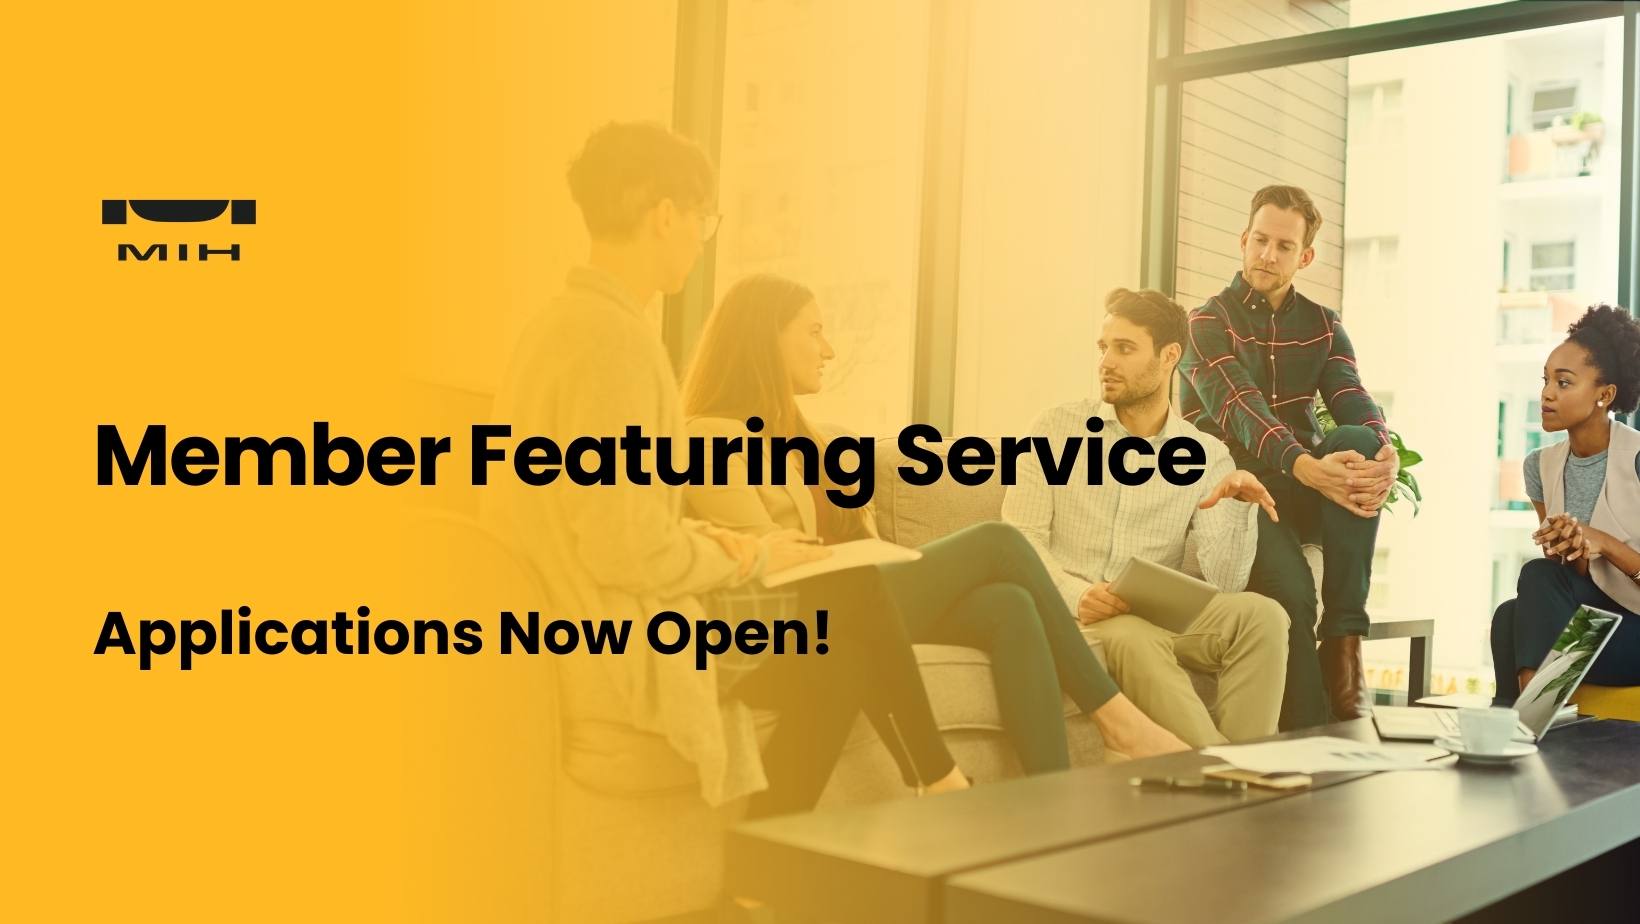 Precision Marketing! Member Featuring Service Now Opens to Contributor and M+ Service Members